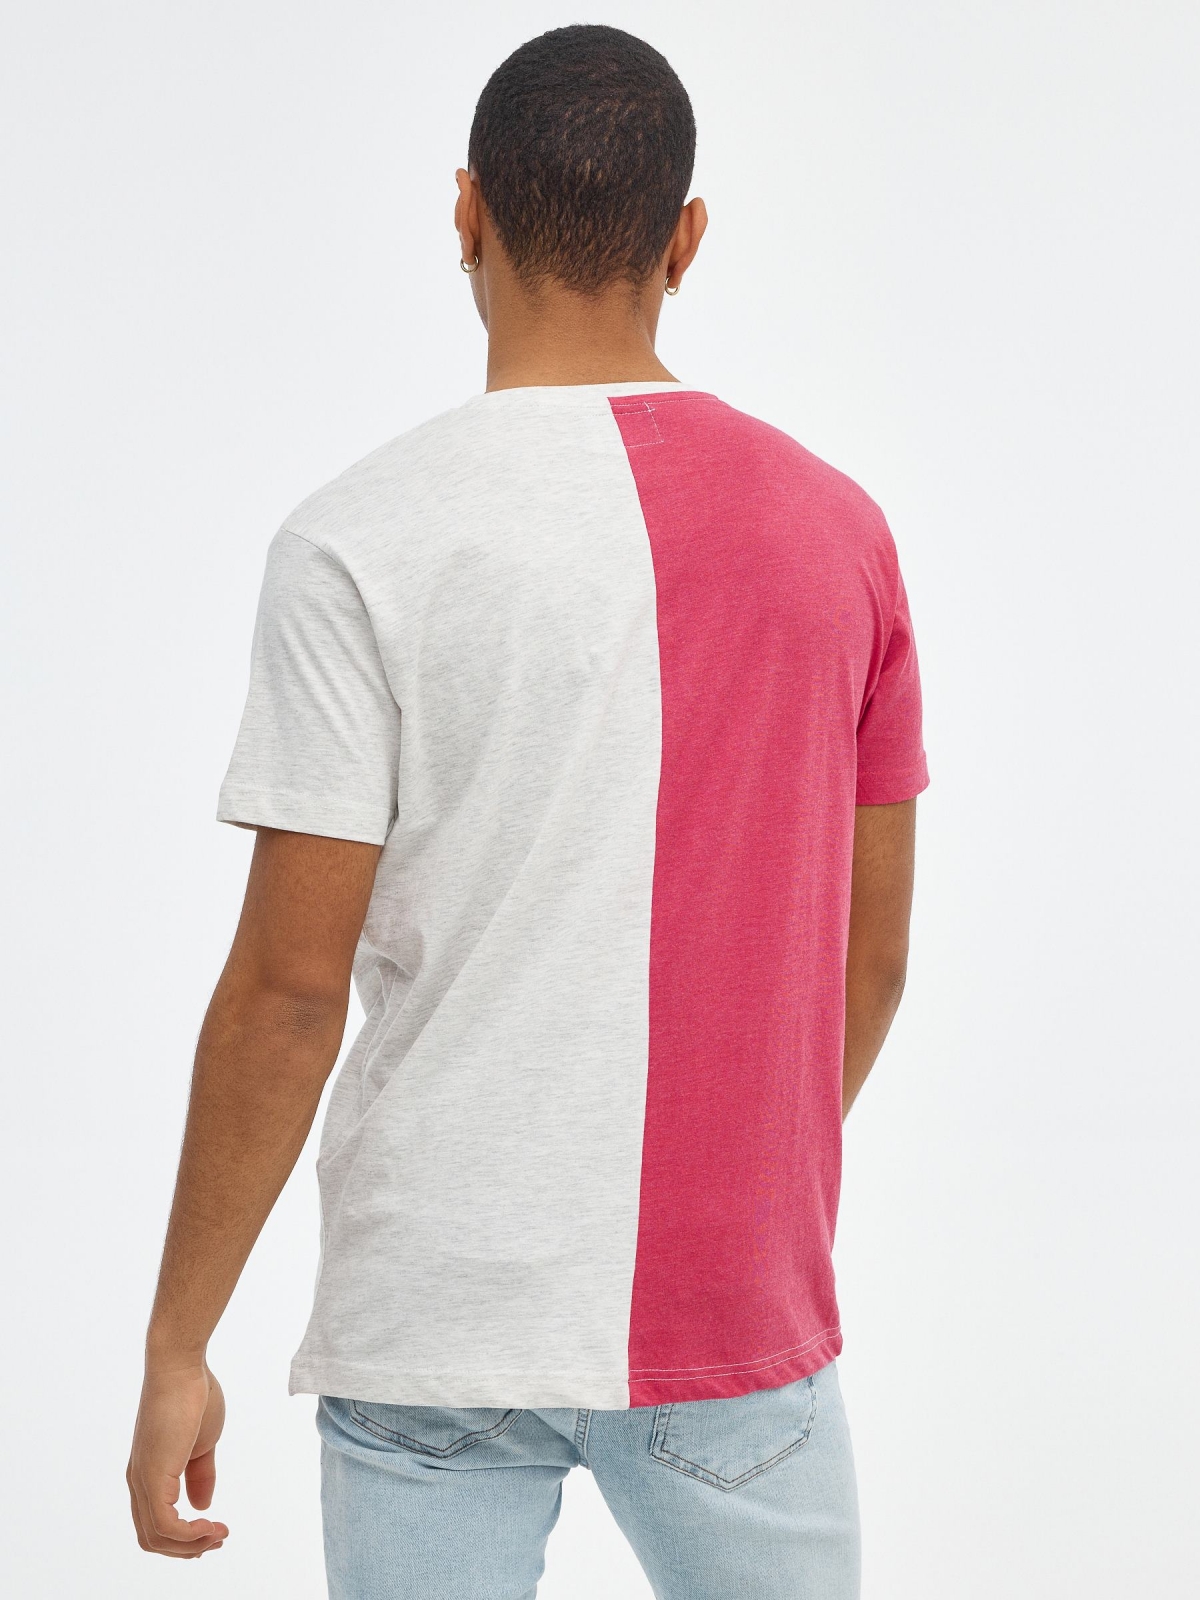 ATYPICAL T-shirt red middle back view